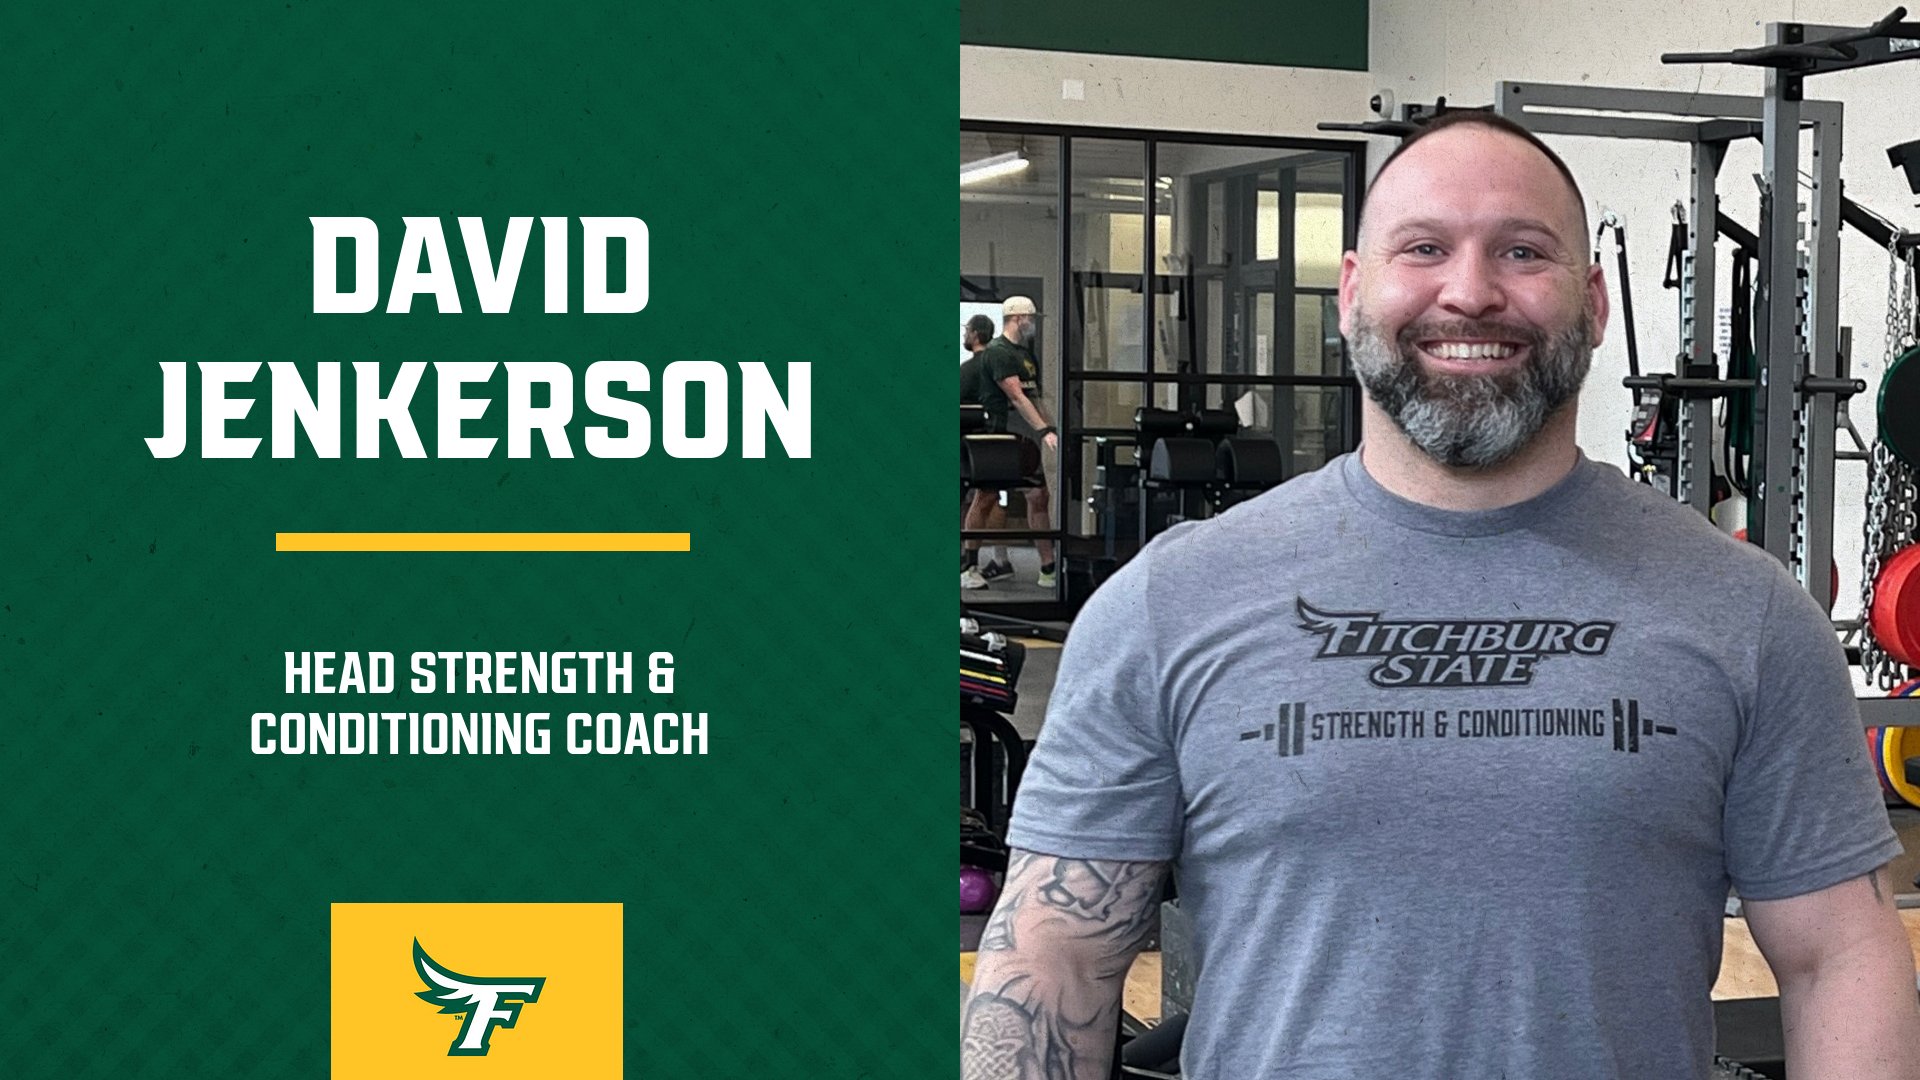 Jenkerson Tabbed New Strength & Conditioning Coach